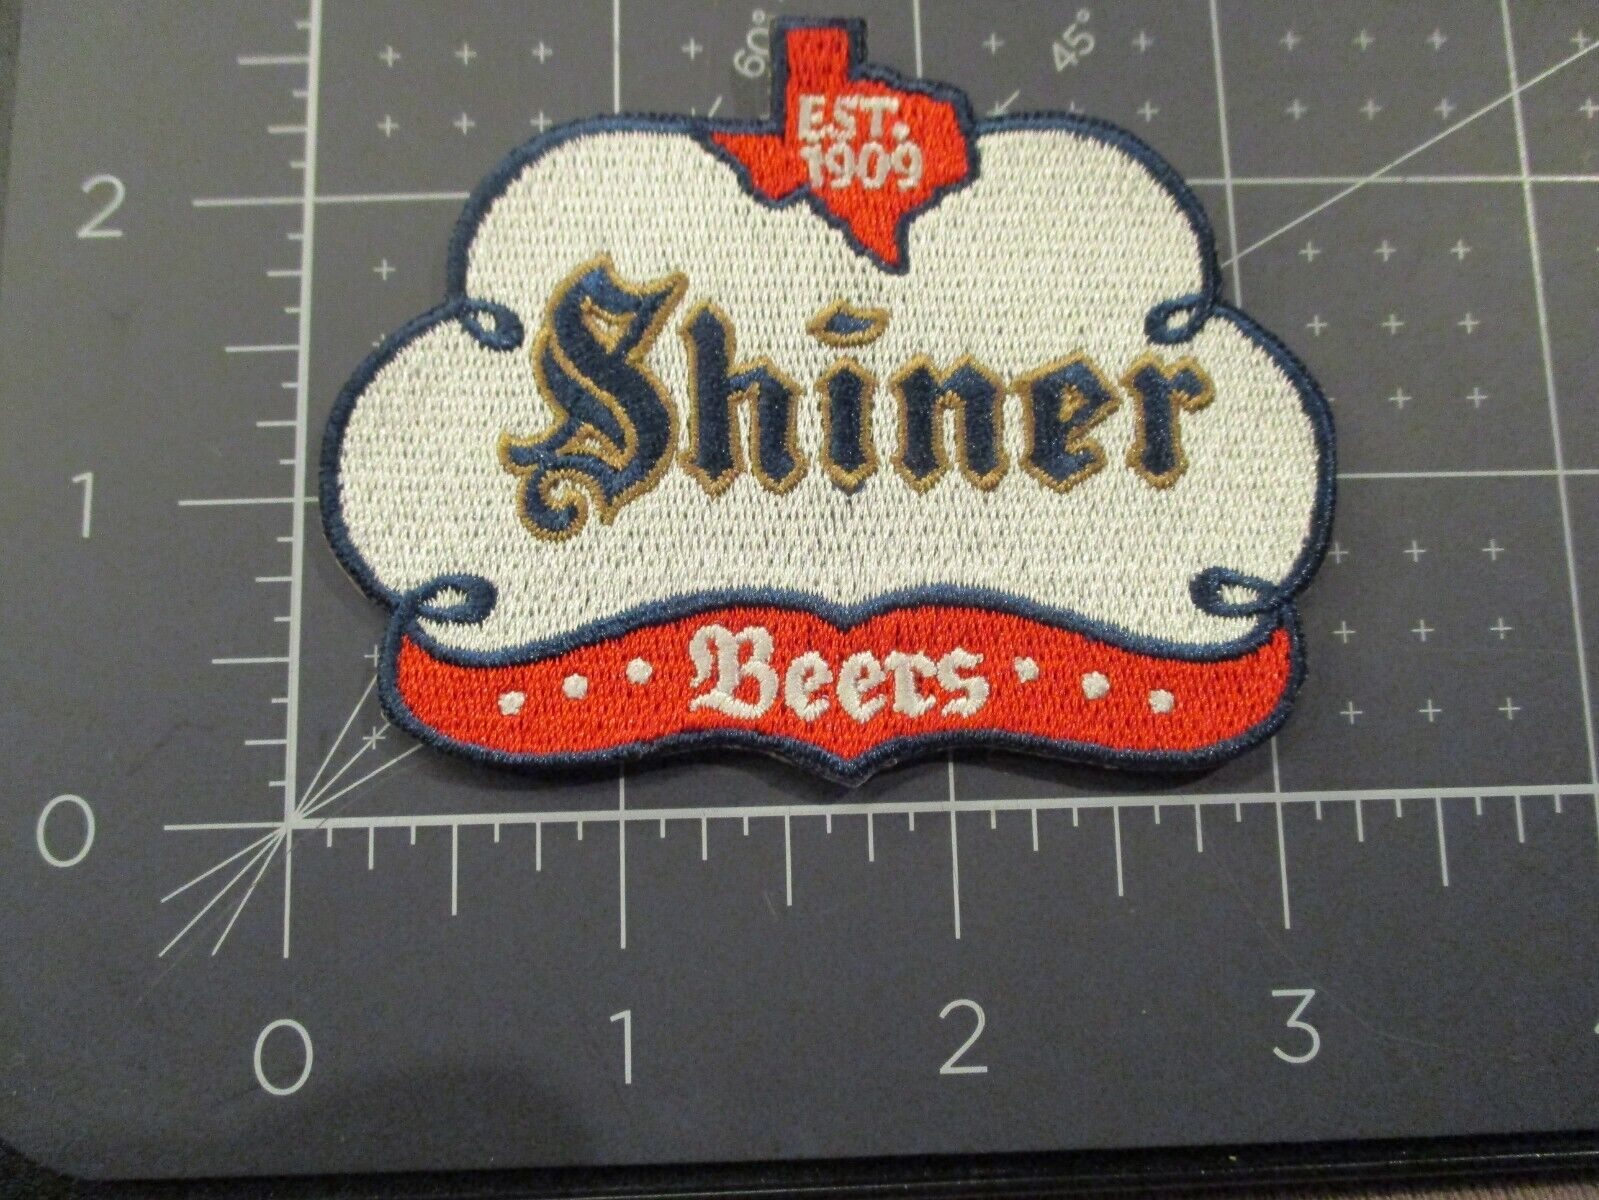 SHINER Texas bock spoetzl Stick On PATCH craft beer brewery brewing